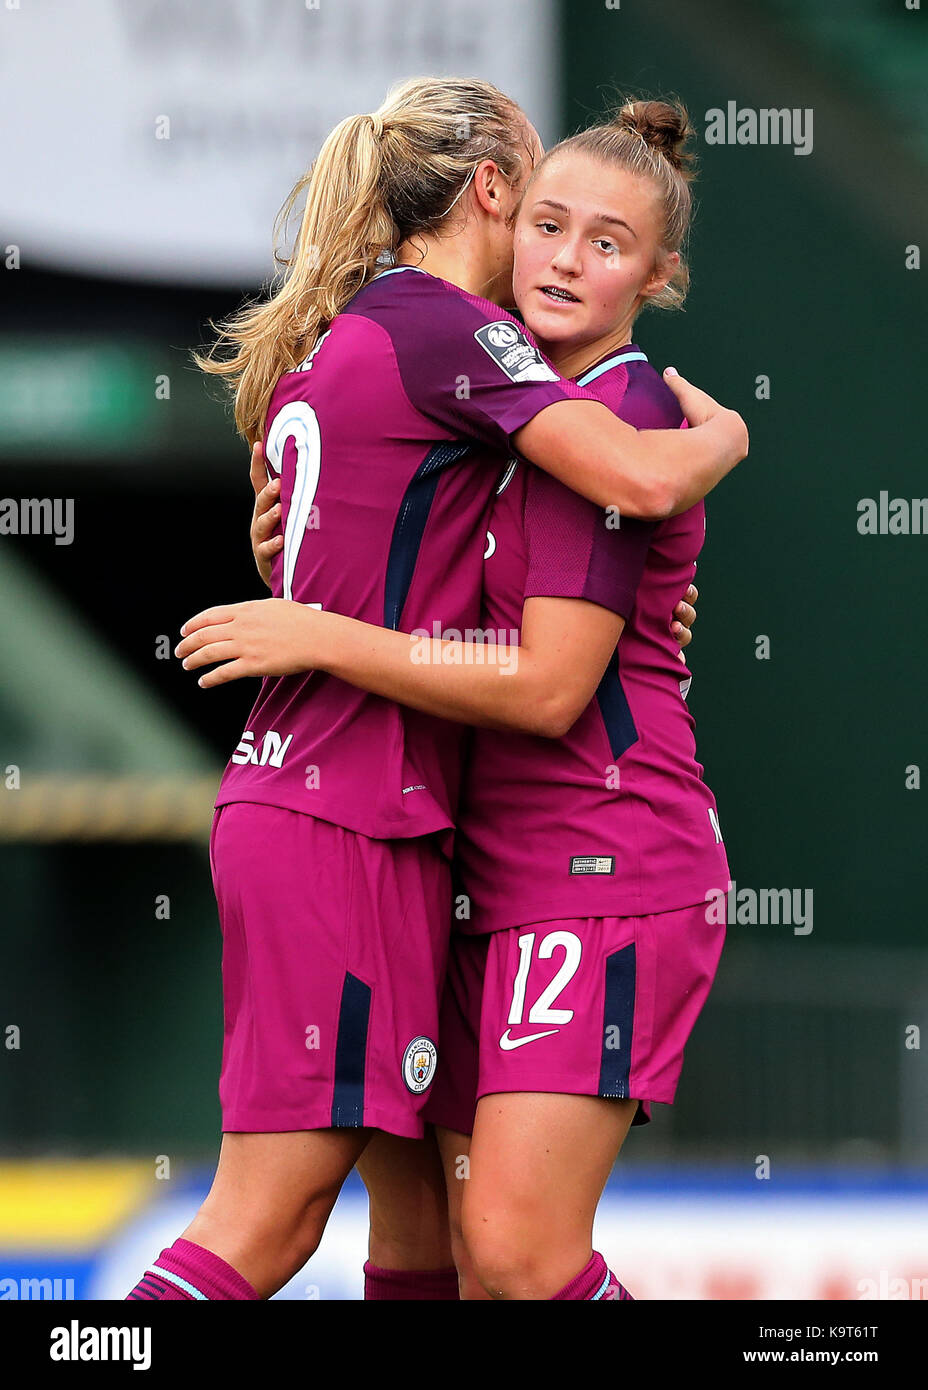 Manchester City's Geogria Stanway (right) celebrates scoring her sides fourth goal with Manchester City's Claire Emslie during the FA Women's Super League at Huish Park, Yeovil. Stock Photo